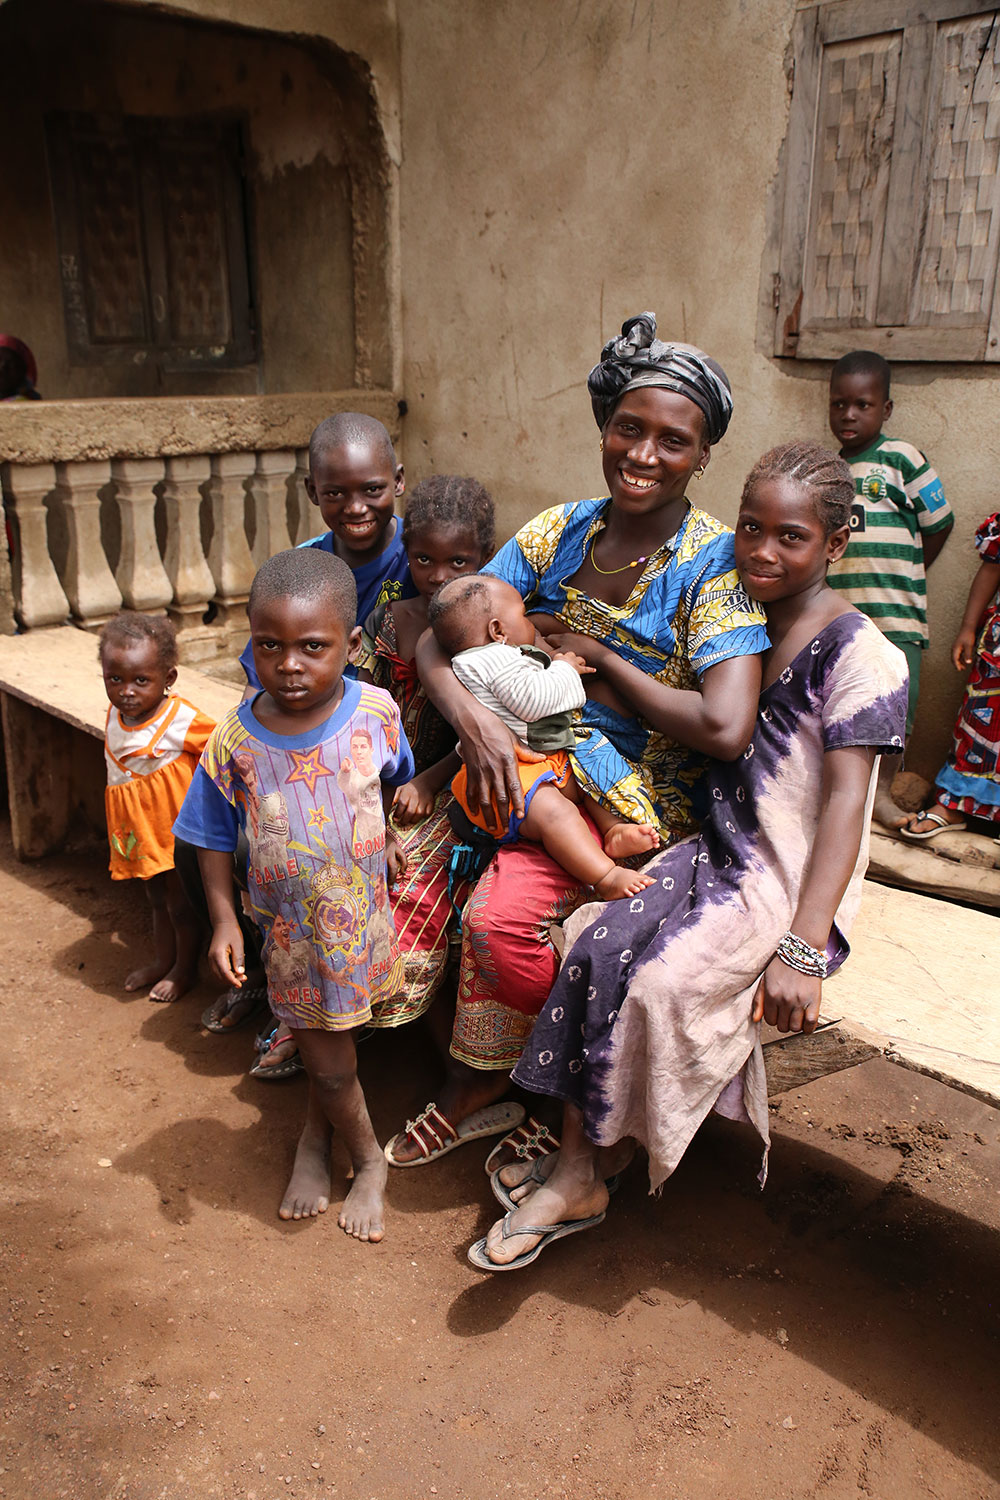 A mother in Nialia poses with her seven children while breastfeeding her youngest. One of the practices that SPRING/Guinea promotes through its community videos is the importance of exclusive breastfeeding for the first six months.